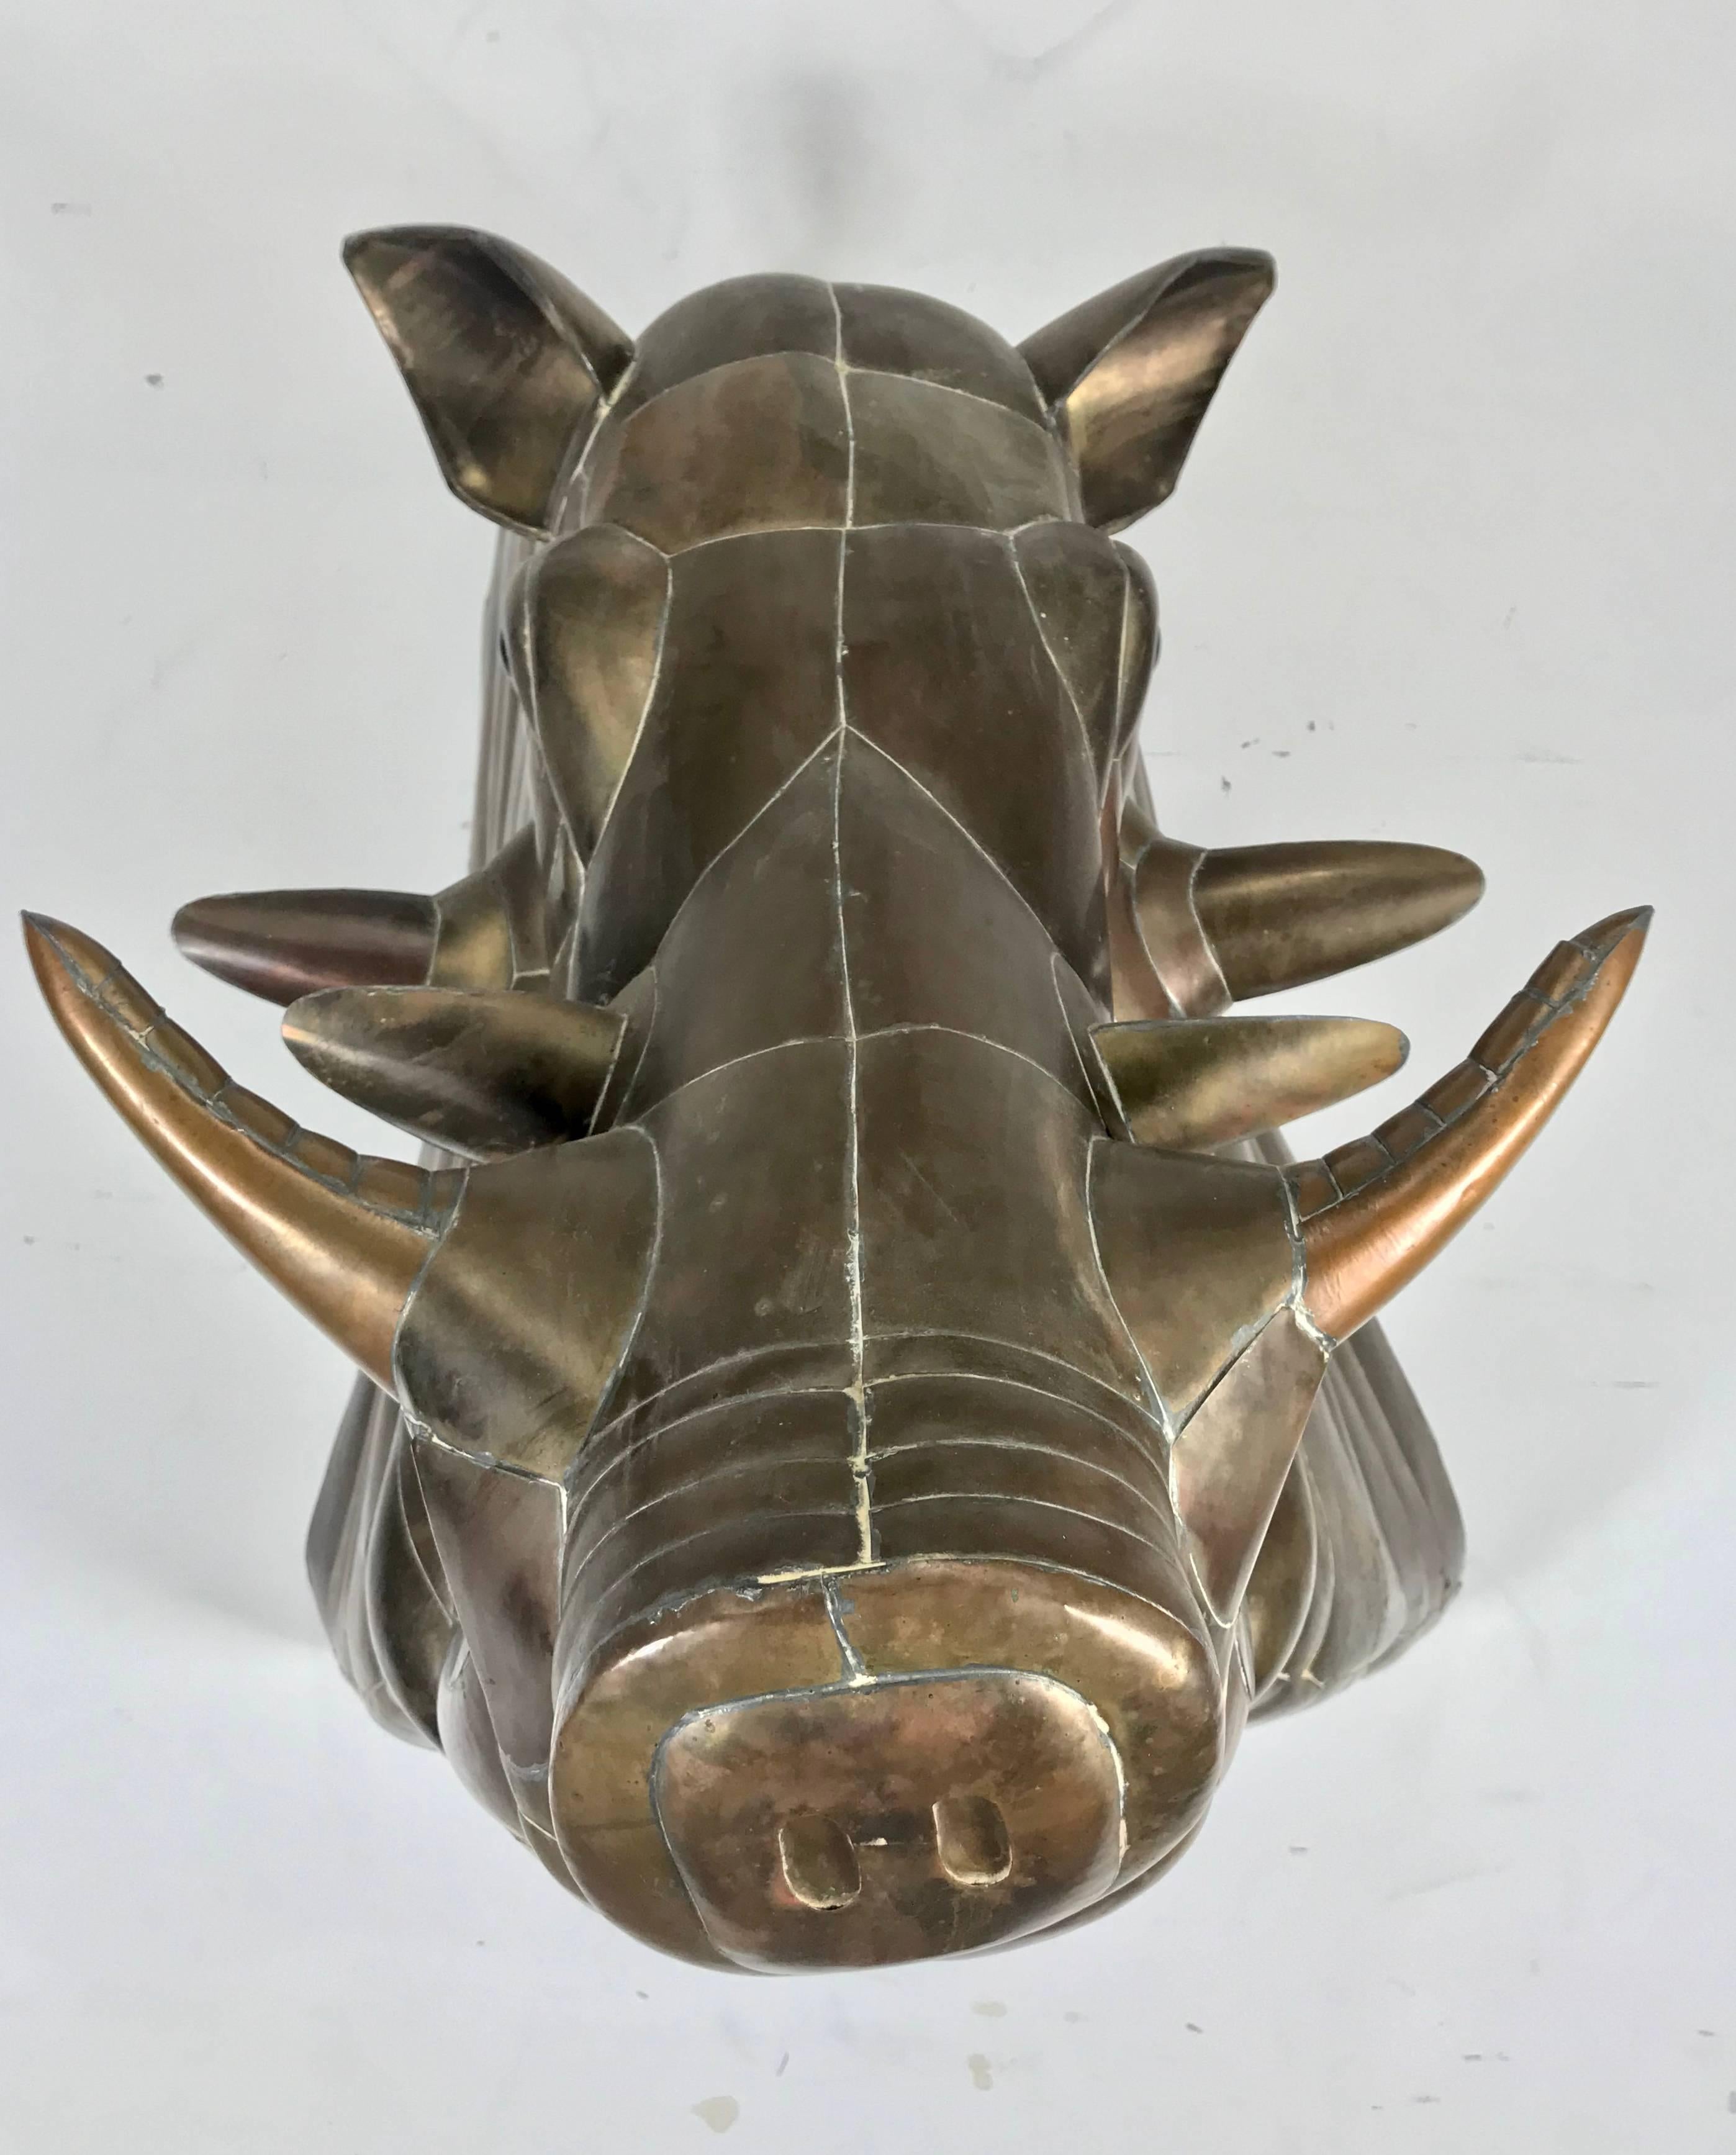 Monumental Sergio Bustamante copper and brass Warthog wall sculpture.
Sergio Bustamante is a Mexican artist and sculptor. Though born in Culiacan, Sinaloa, Mexico, Sergio Bustamante has lived in the Guadalajara area since early childhood. In his